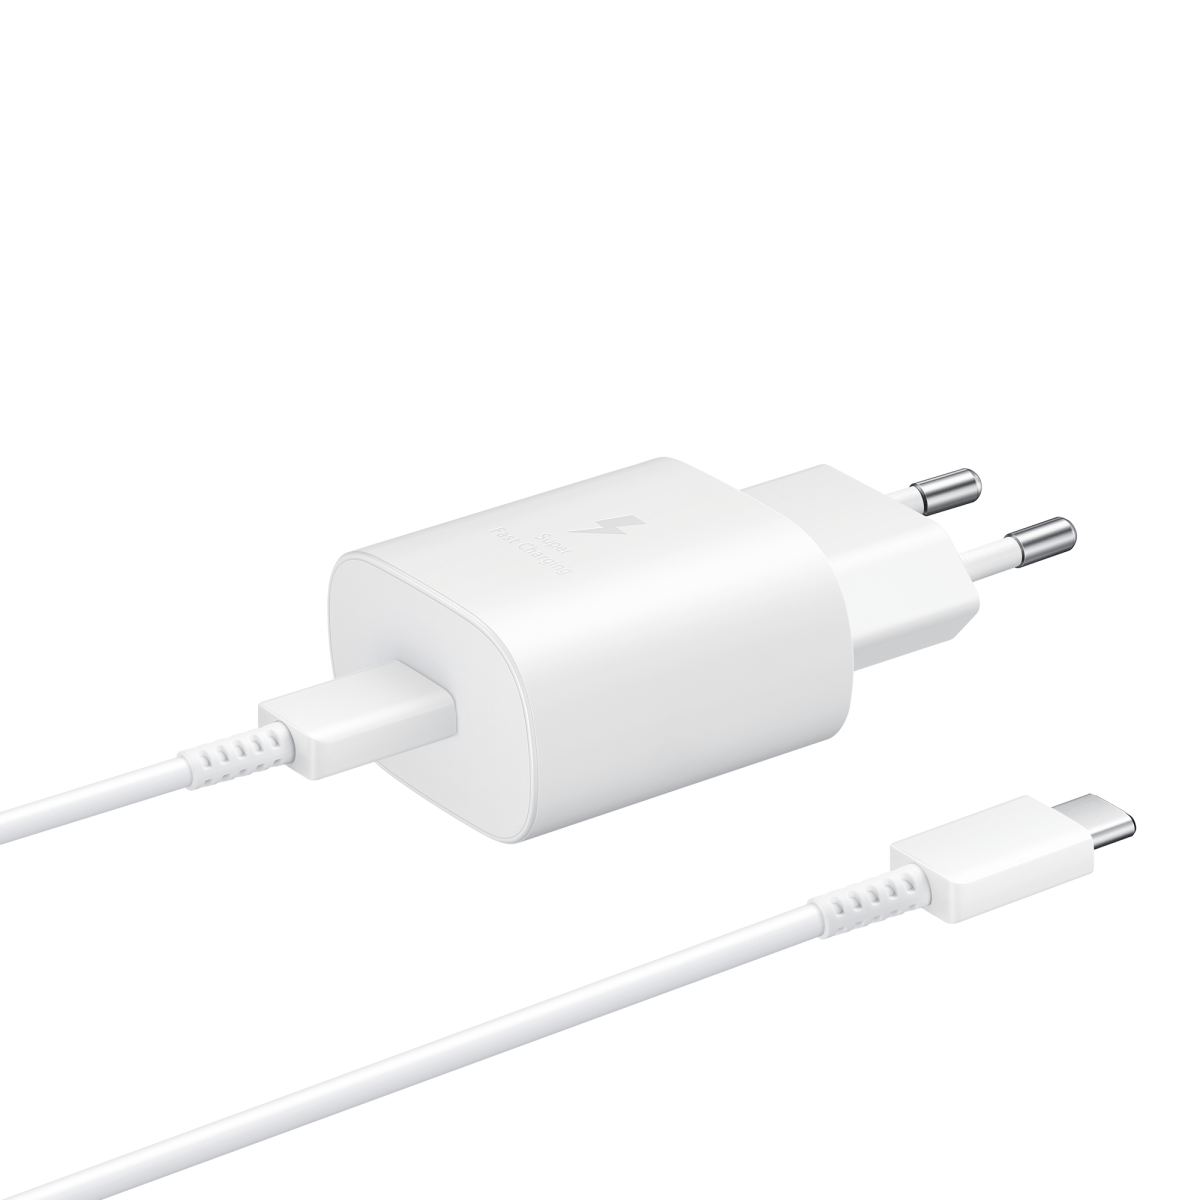 Samsung's 25W fast charger - Here's the 45W Galaxy Note 10+ charger that won't ship inside the box